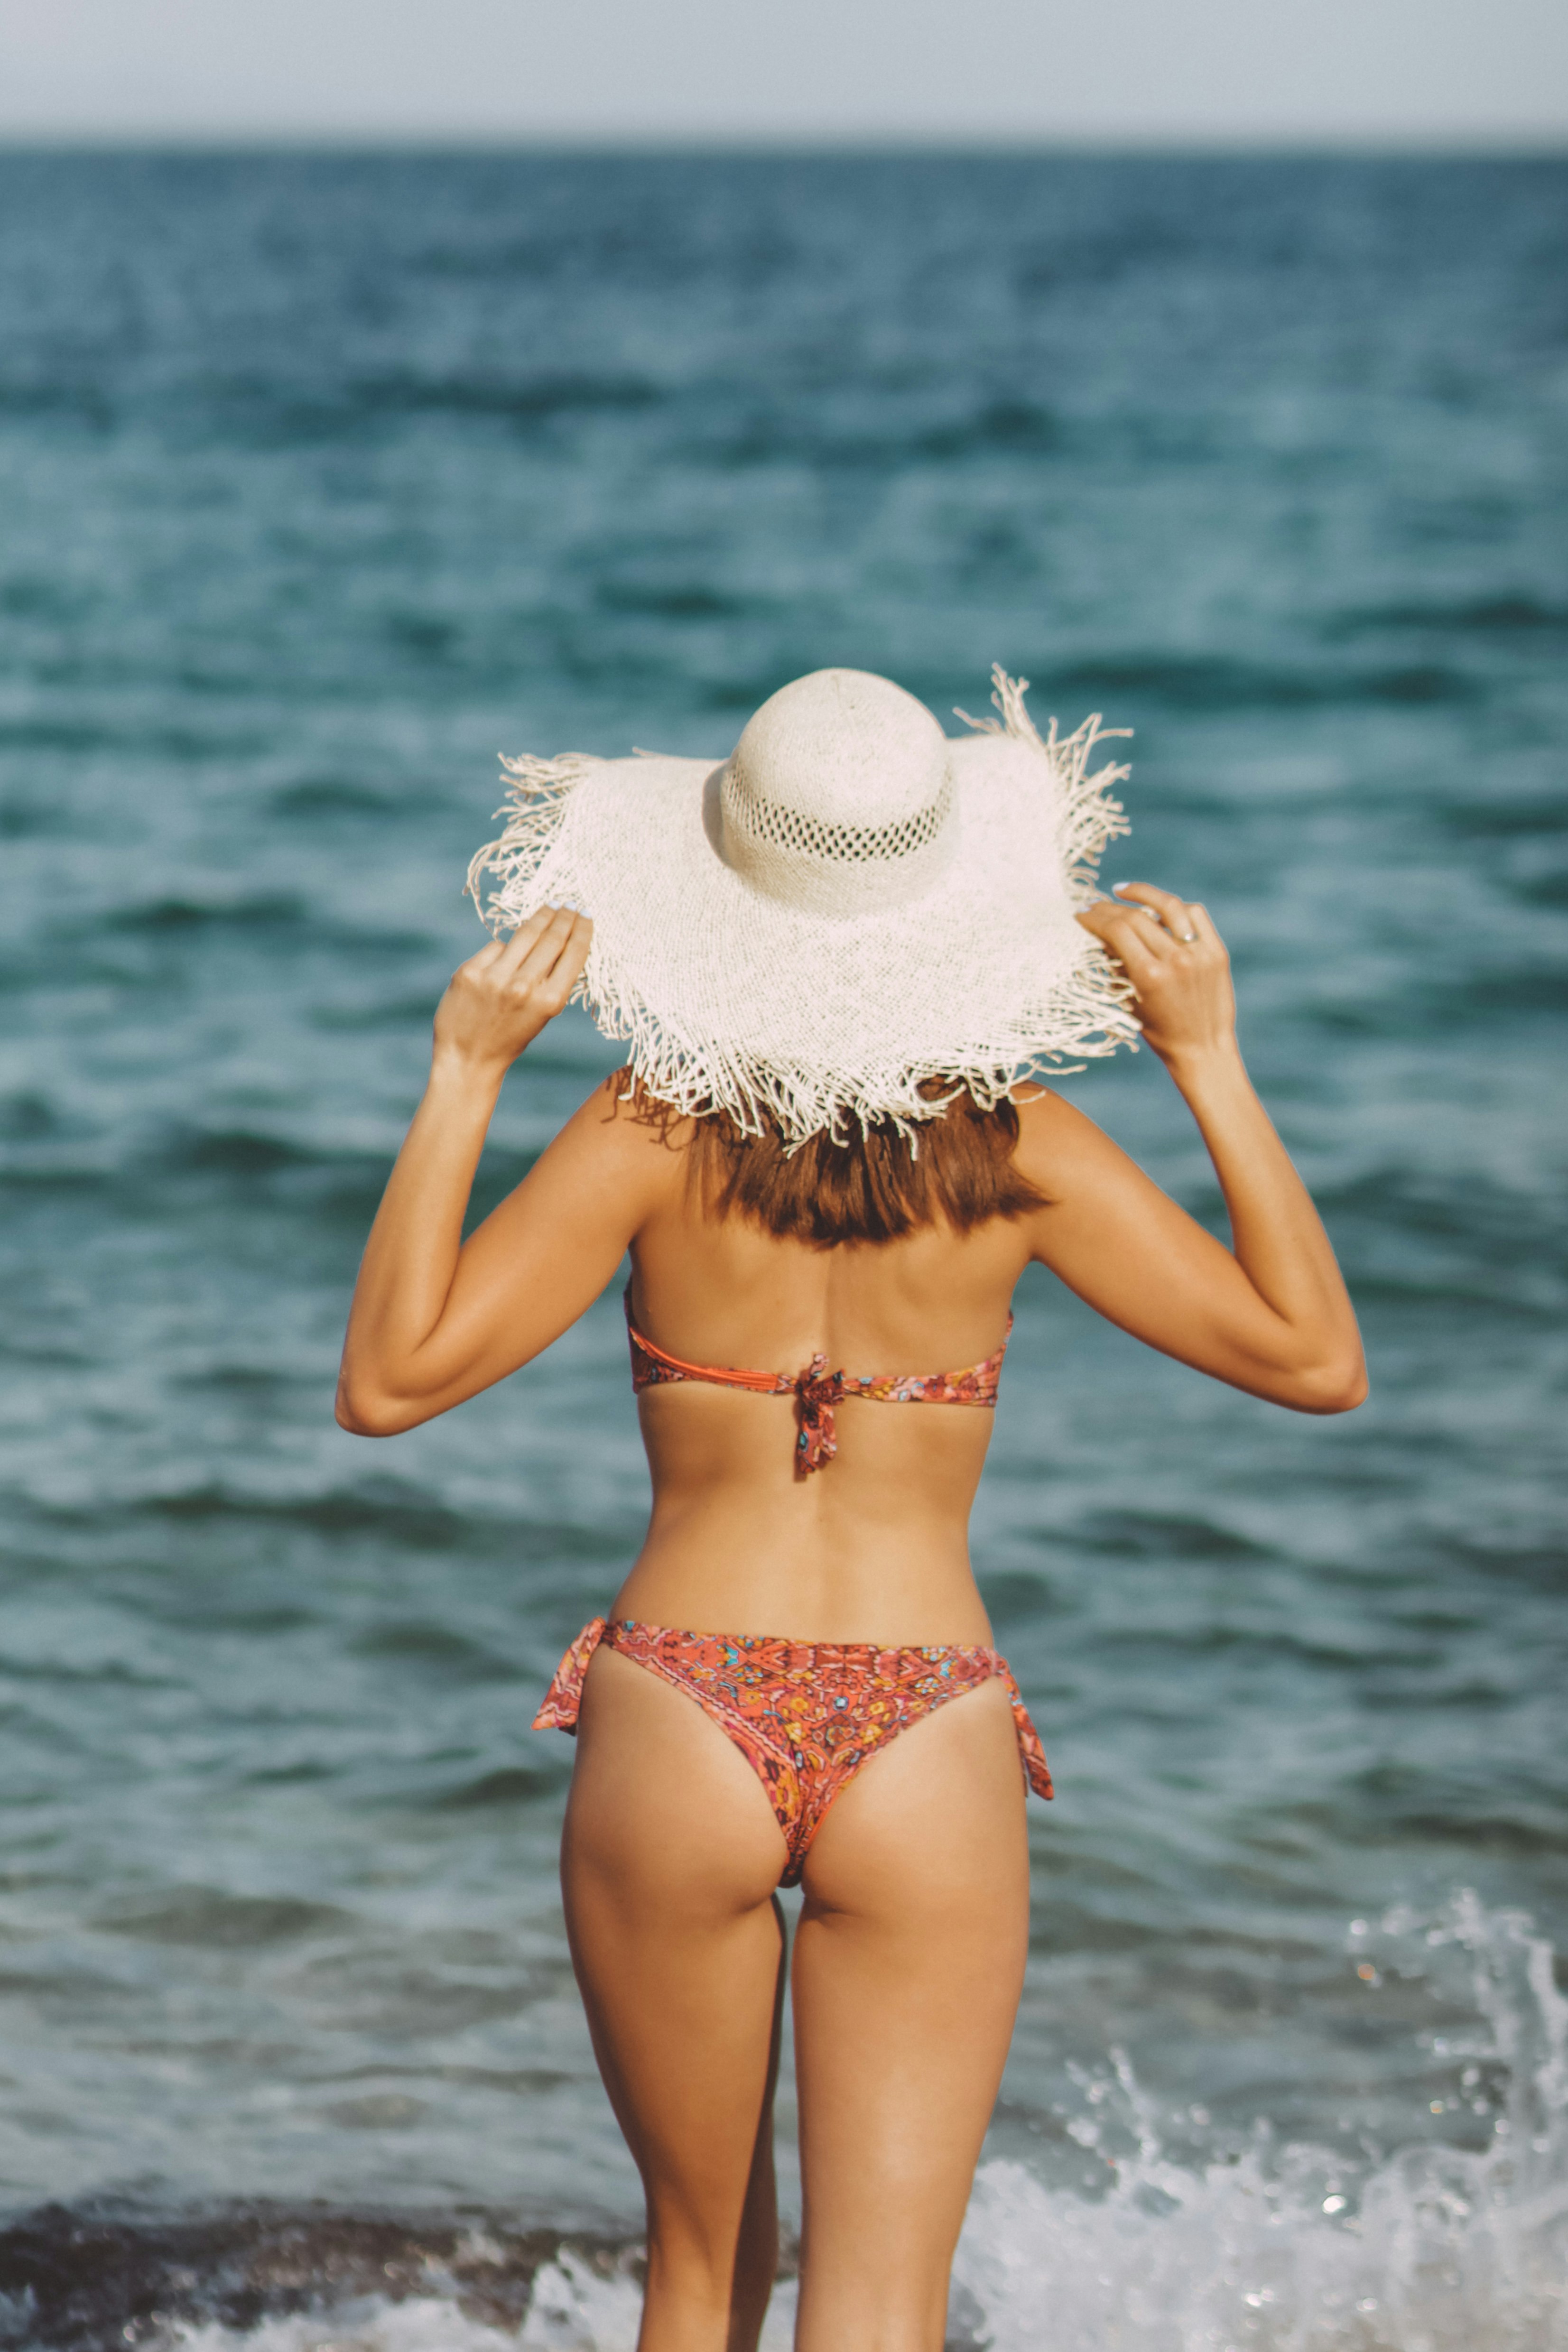 casy smith add images of bikinis on the beach photo